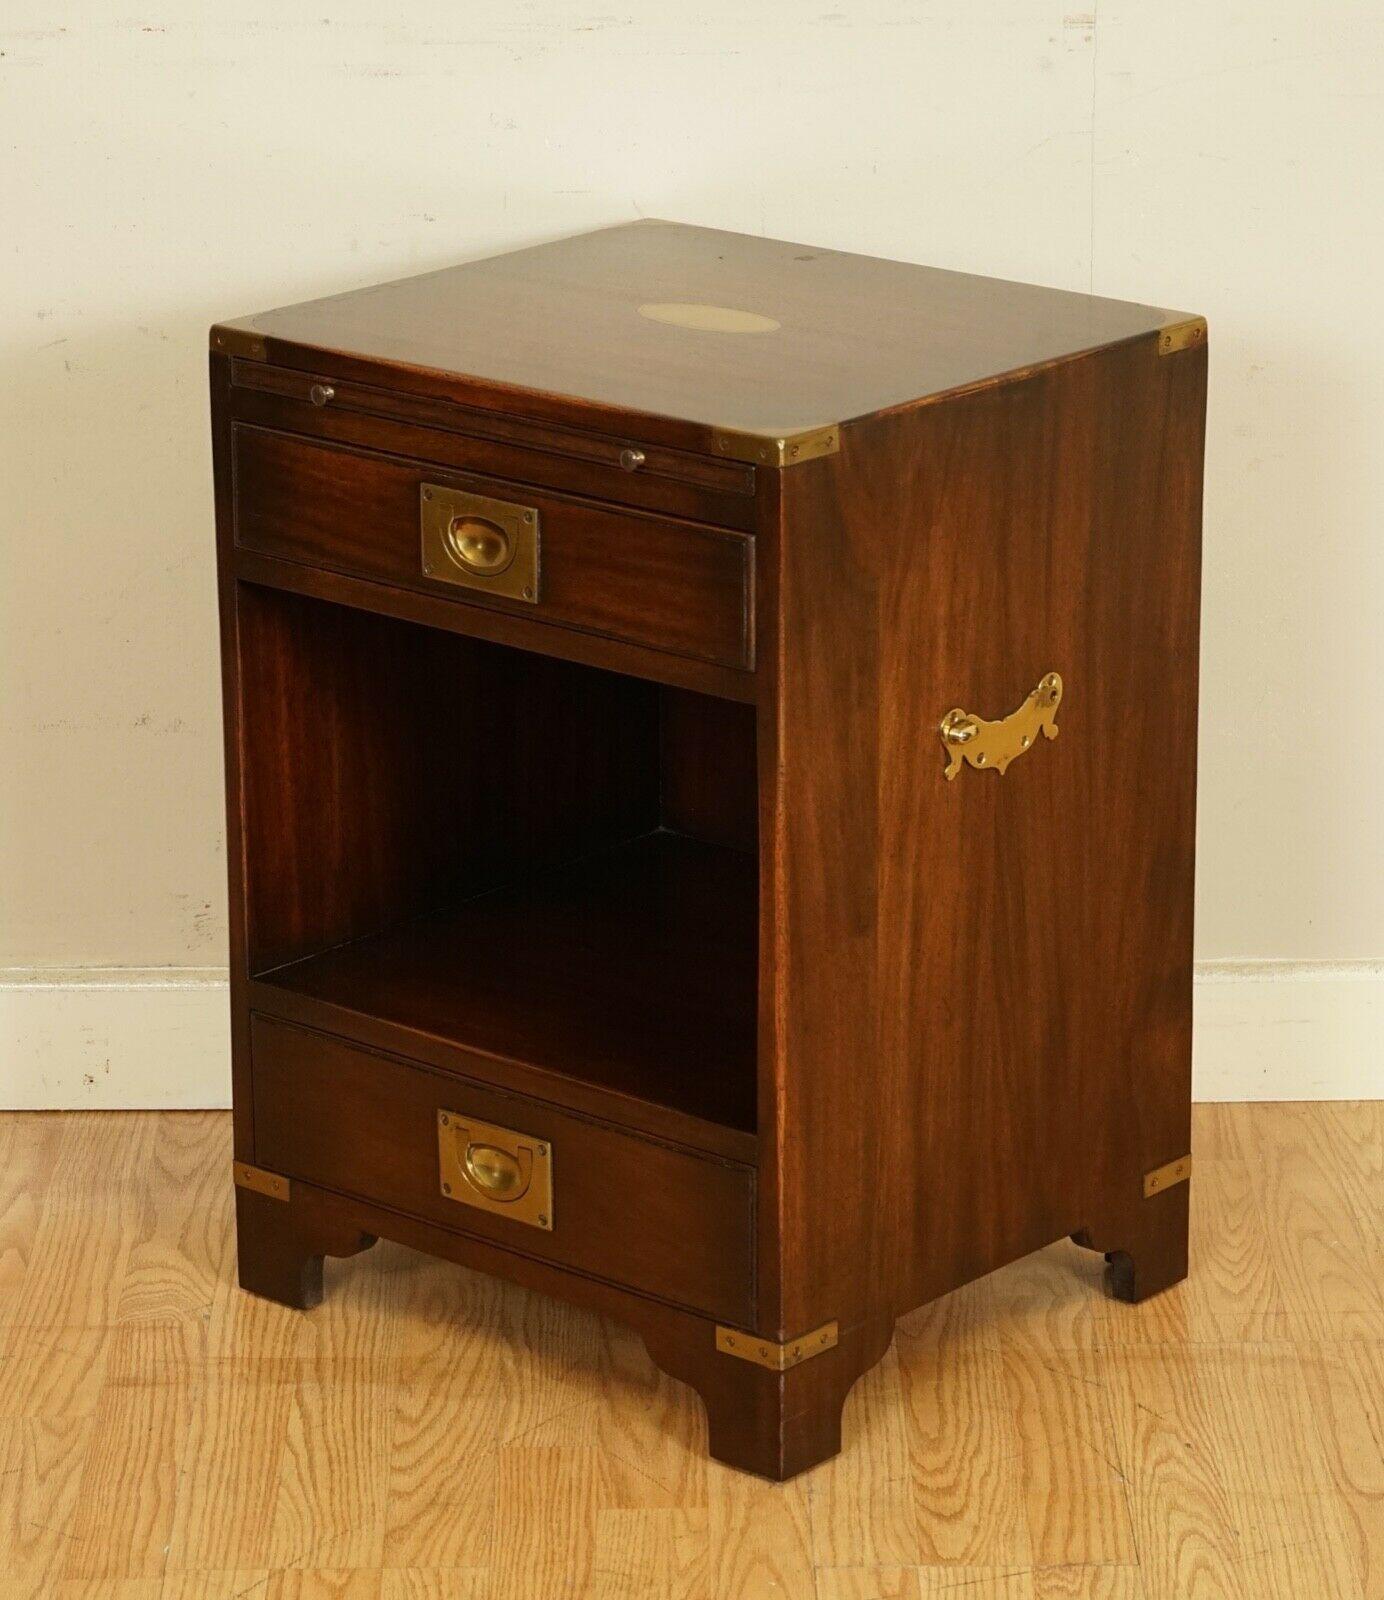 British Vintage Military Campaign Hardwood Bedside/End Table with 2 Drawers